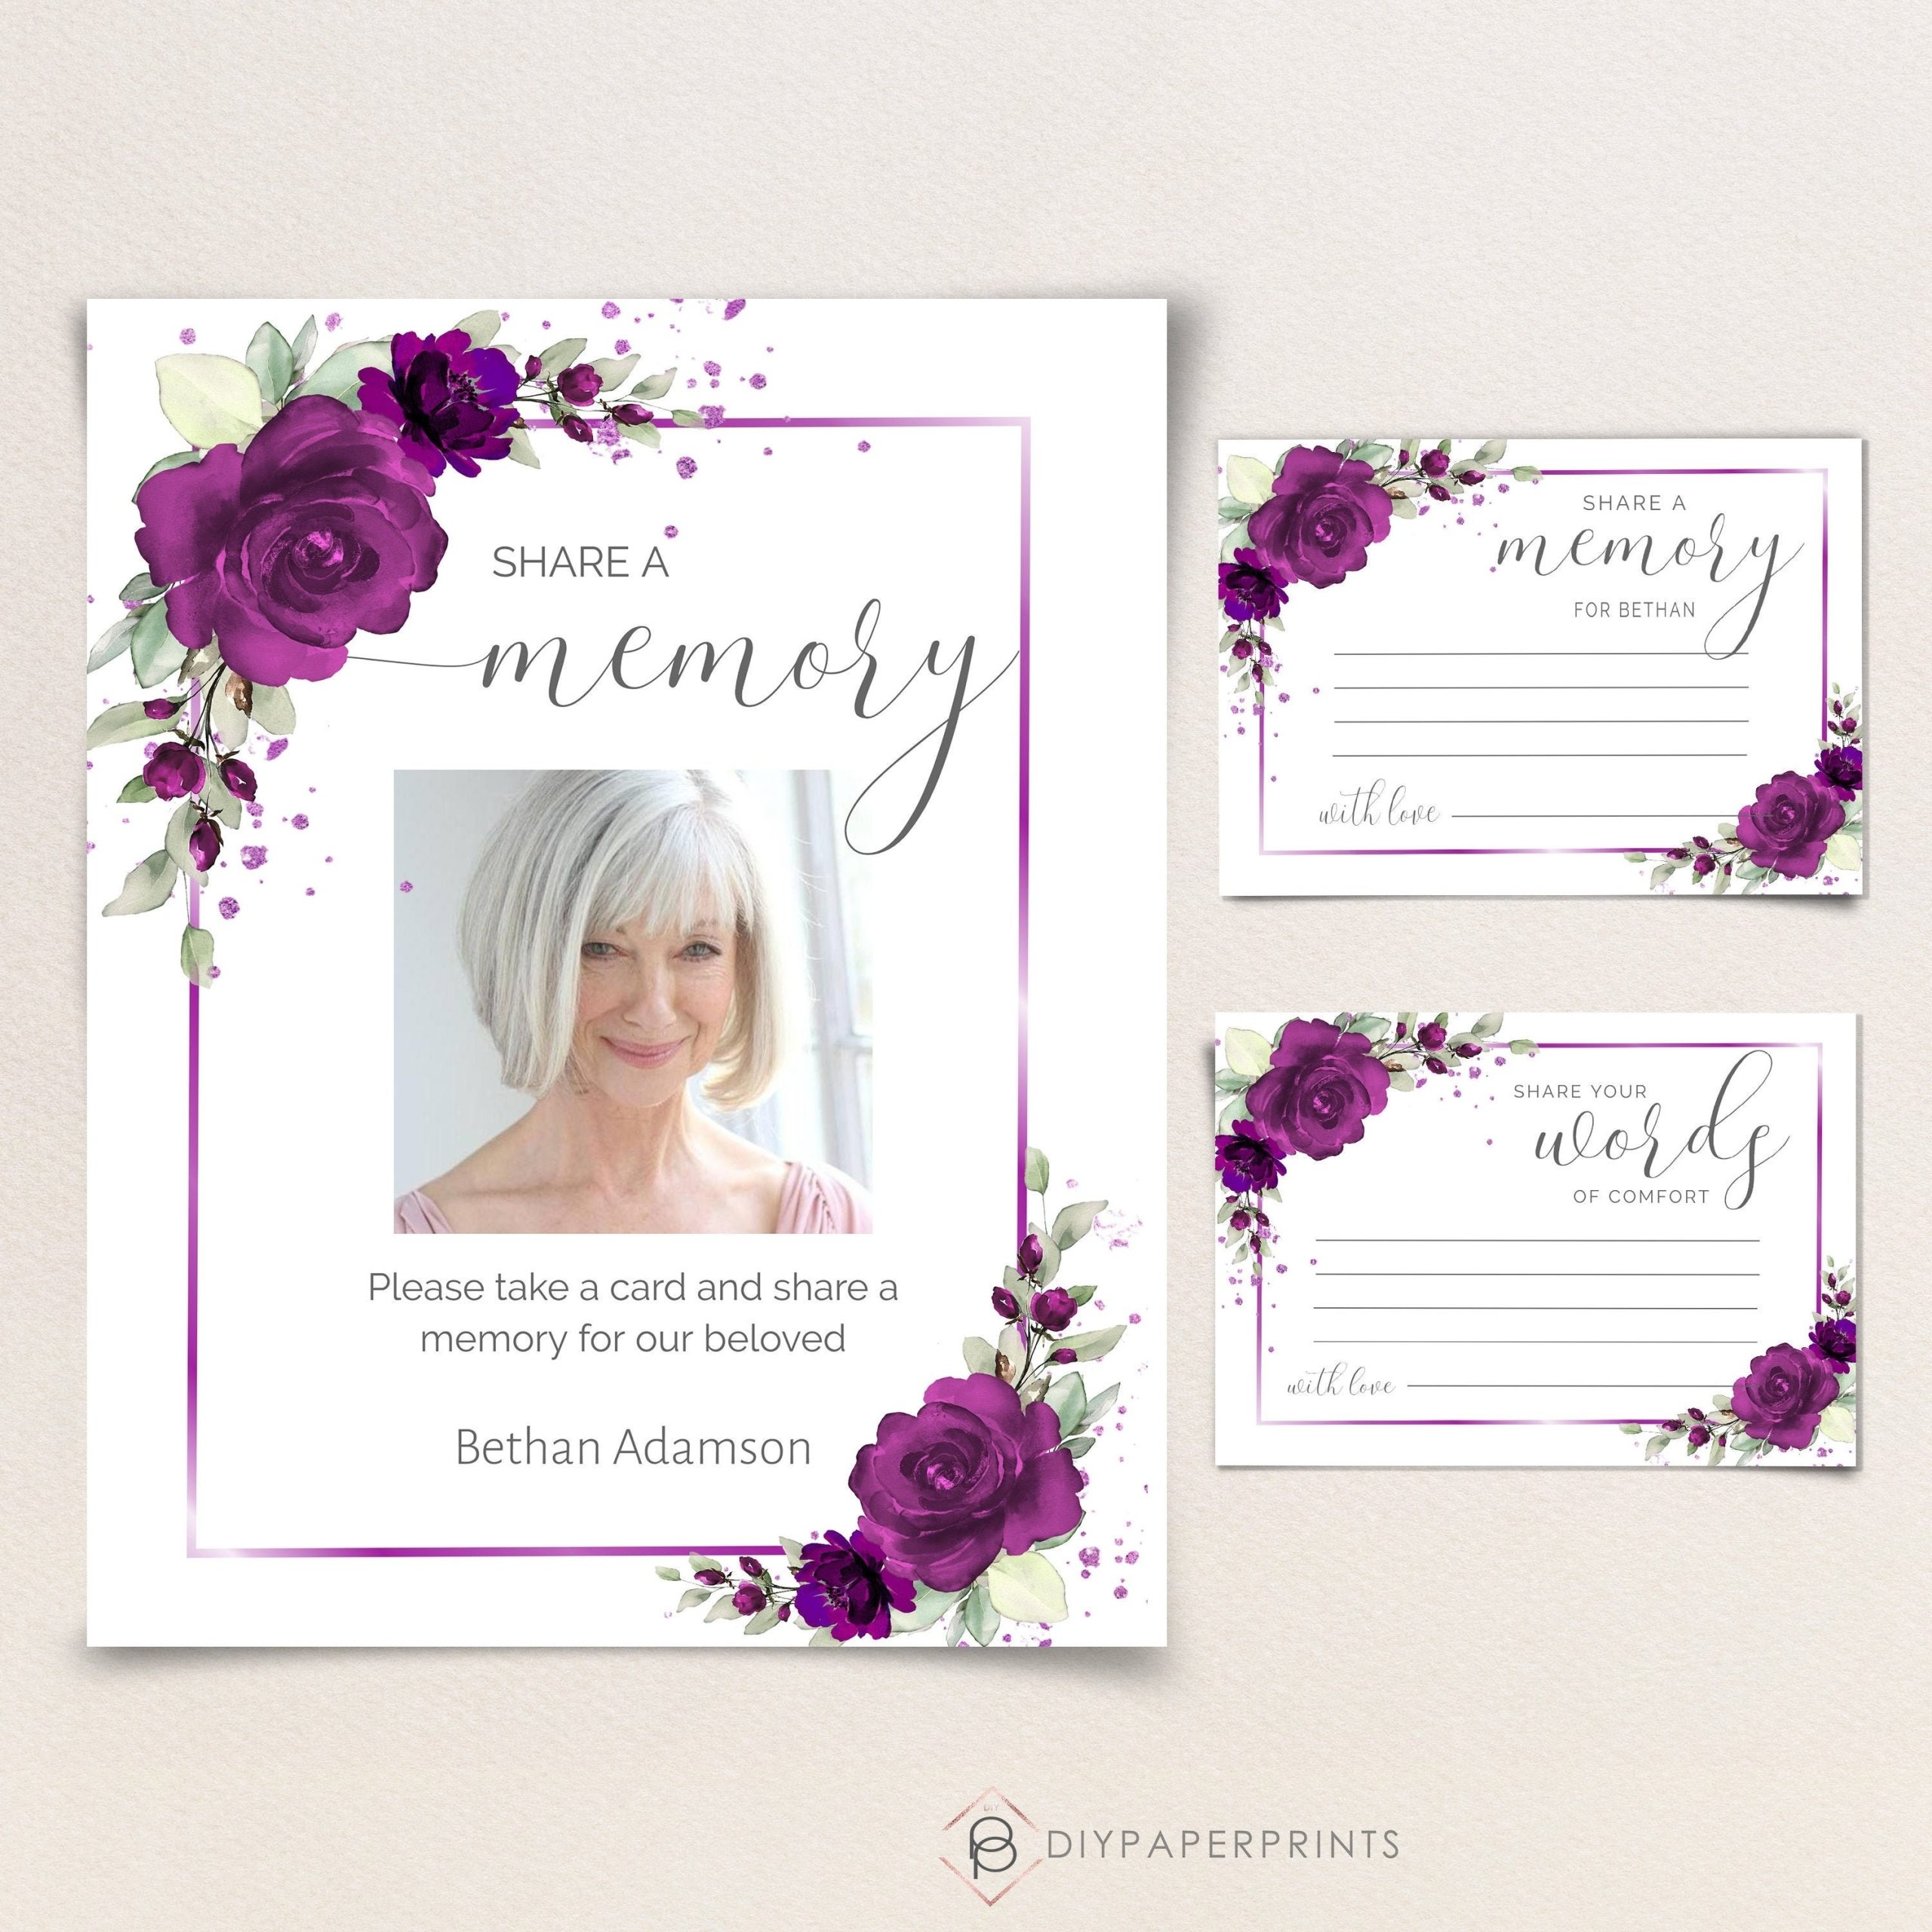 Funeral Share A Memory Card Template Funeral Memorial | Etsy With Regard To In Memory Cards Templates